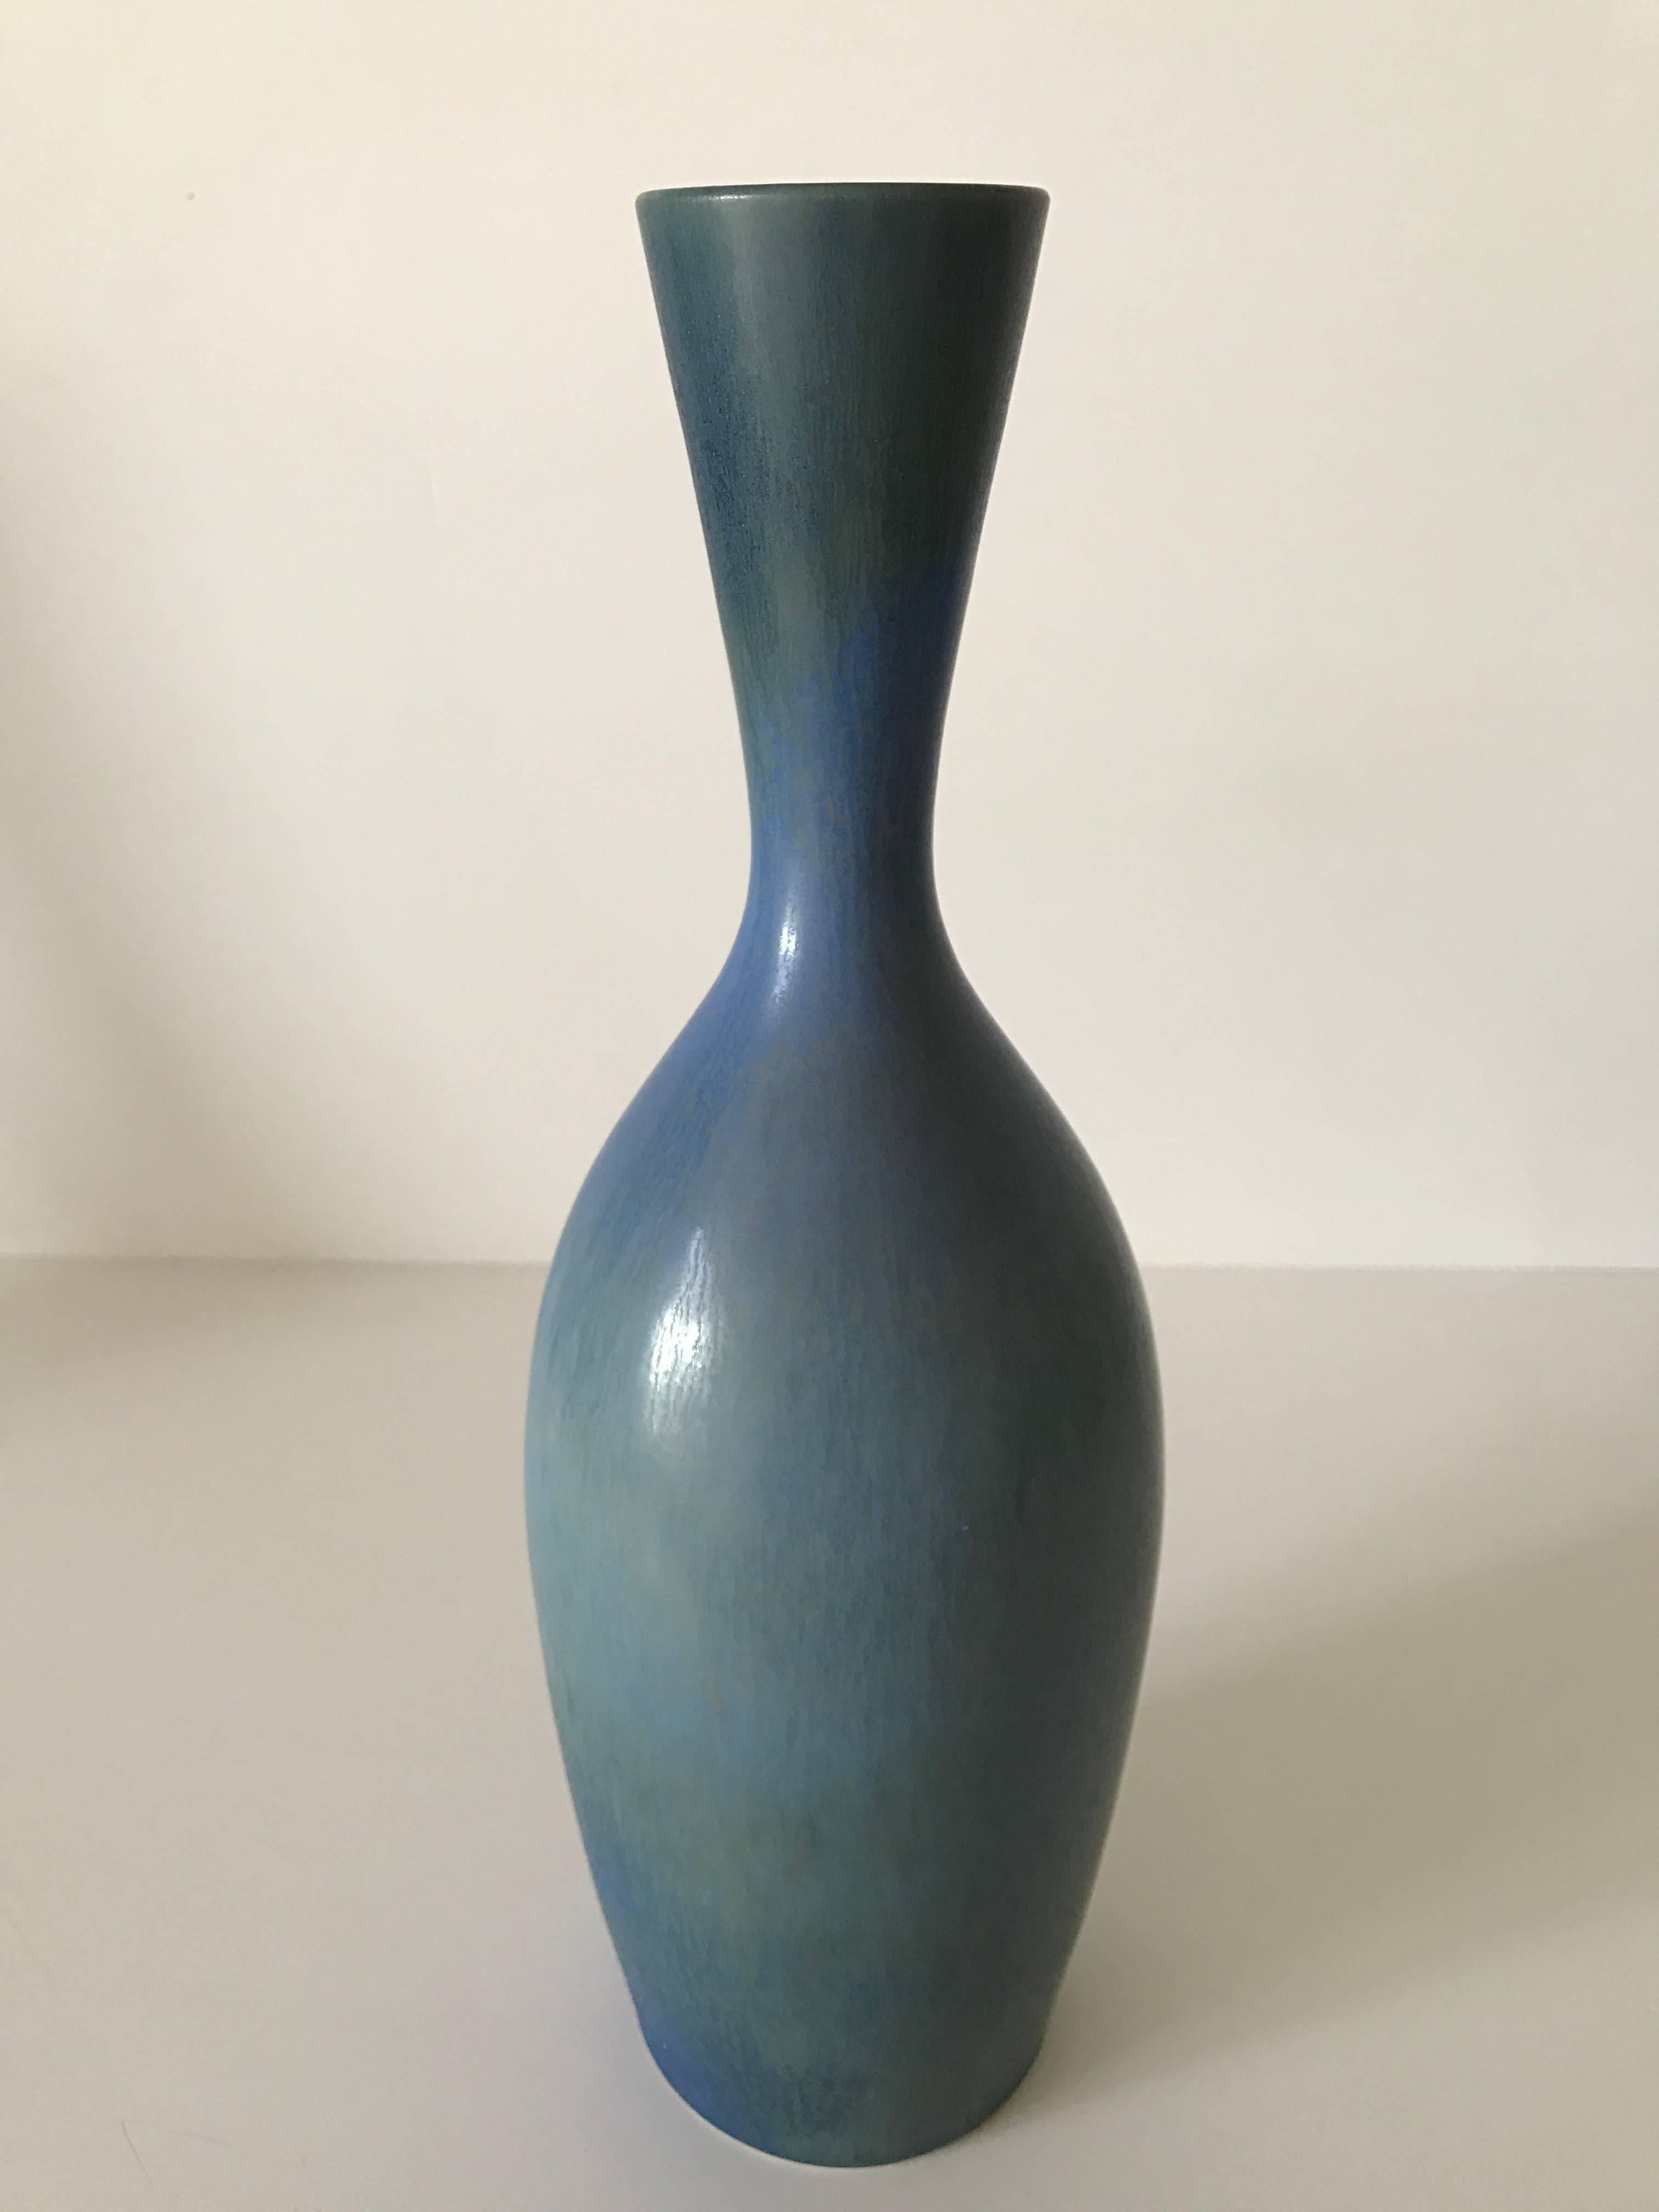 1984 Gustavsberg blue hare's Fur vase made by Sven Wejsfelt.
This is a very rare vase made by Sven Wejsfelt in 1984 and this vase has the glaze called "Hare´s Fur", see closeups. It is very beautiful and measures 29cm in height, the base